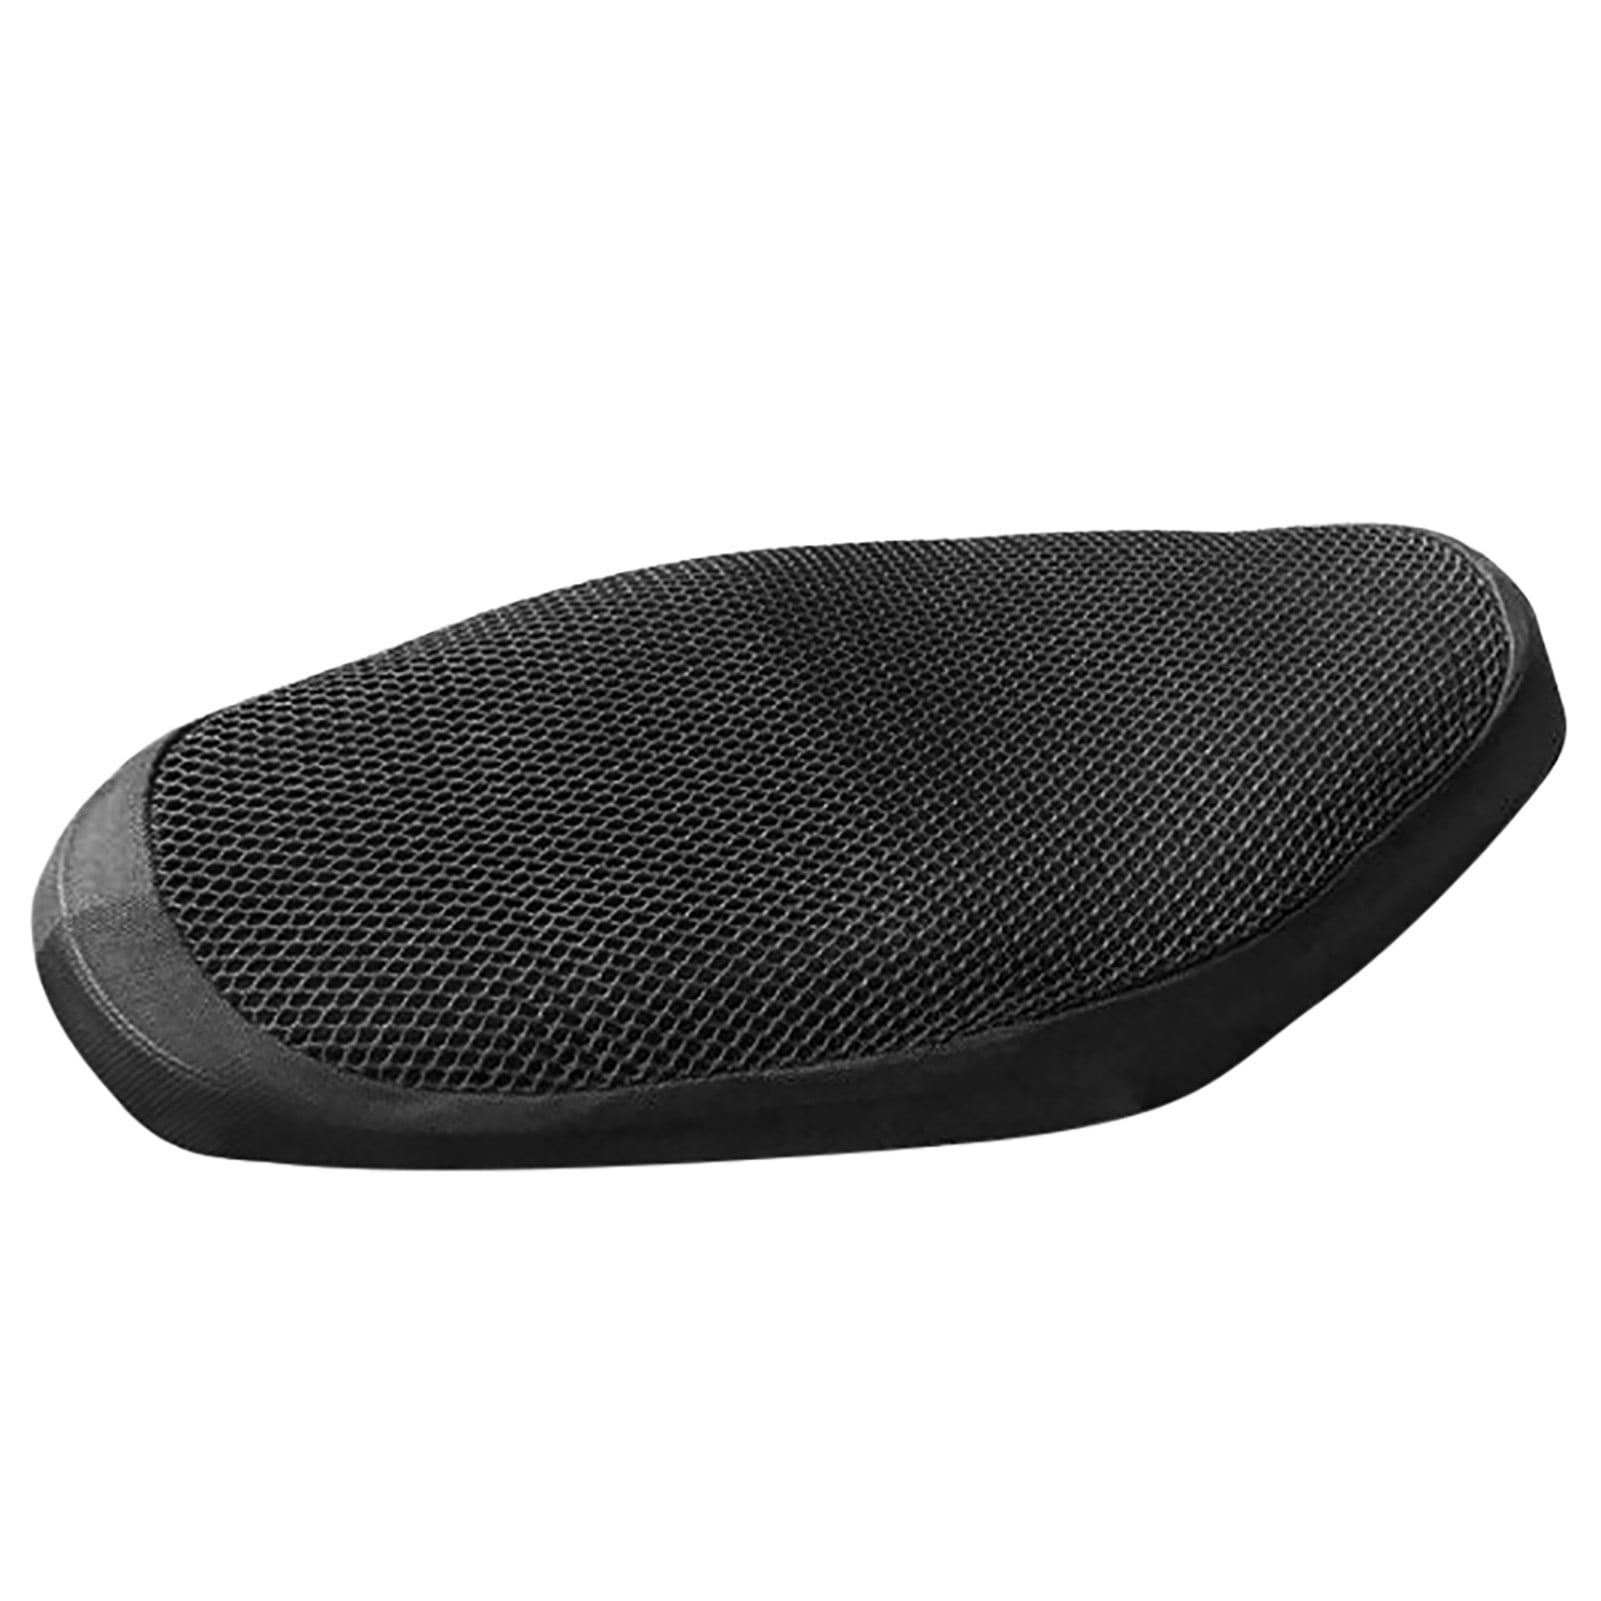 Motorcycle Seat Cover Heat Resistant Breathable Motorcycle Protection Seat Cover Anti-Slip Resilient Mesh Scooter Cushion Seat Covers Bike Motorbike Chair Protector Mat 